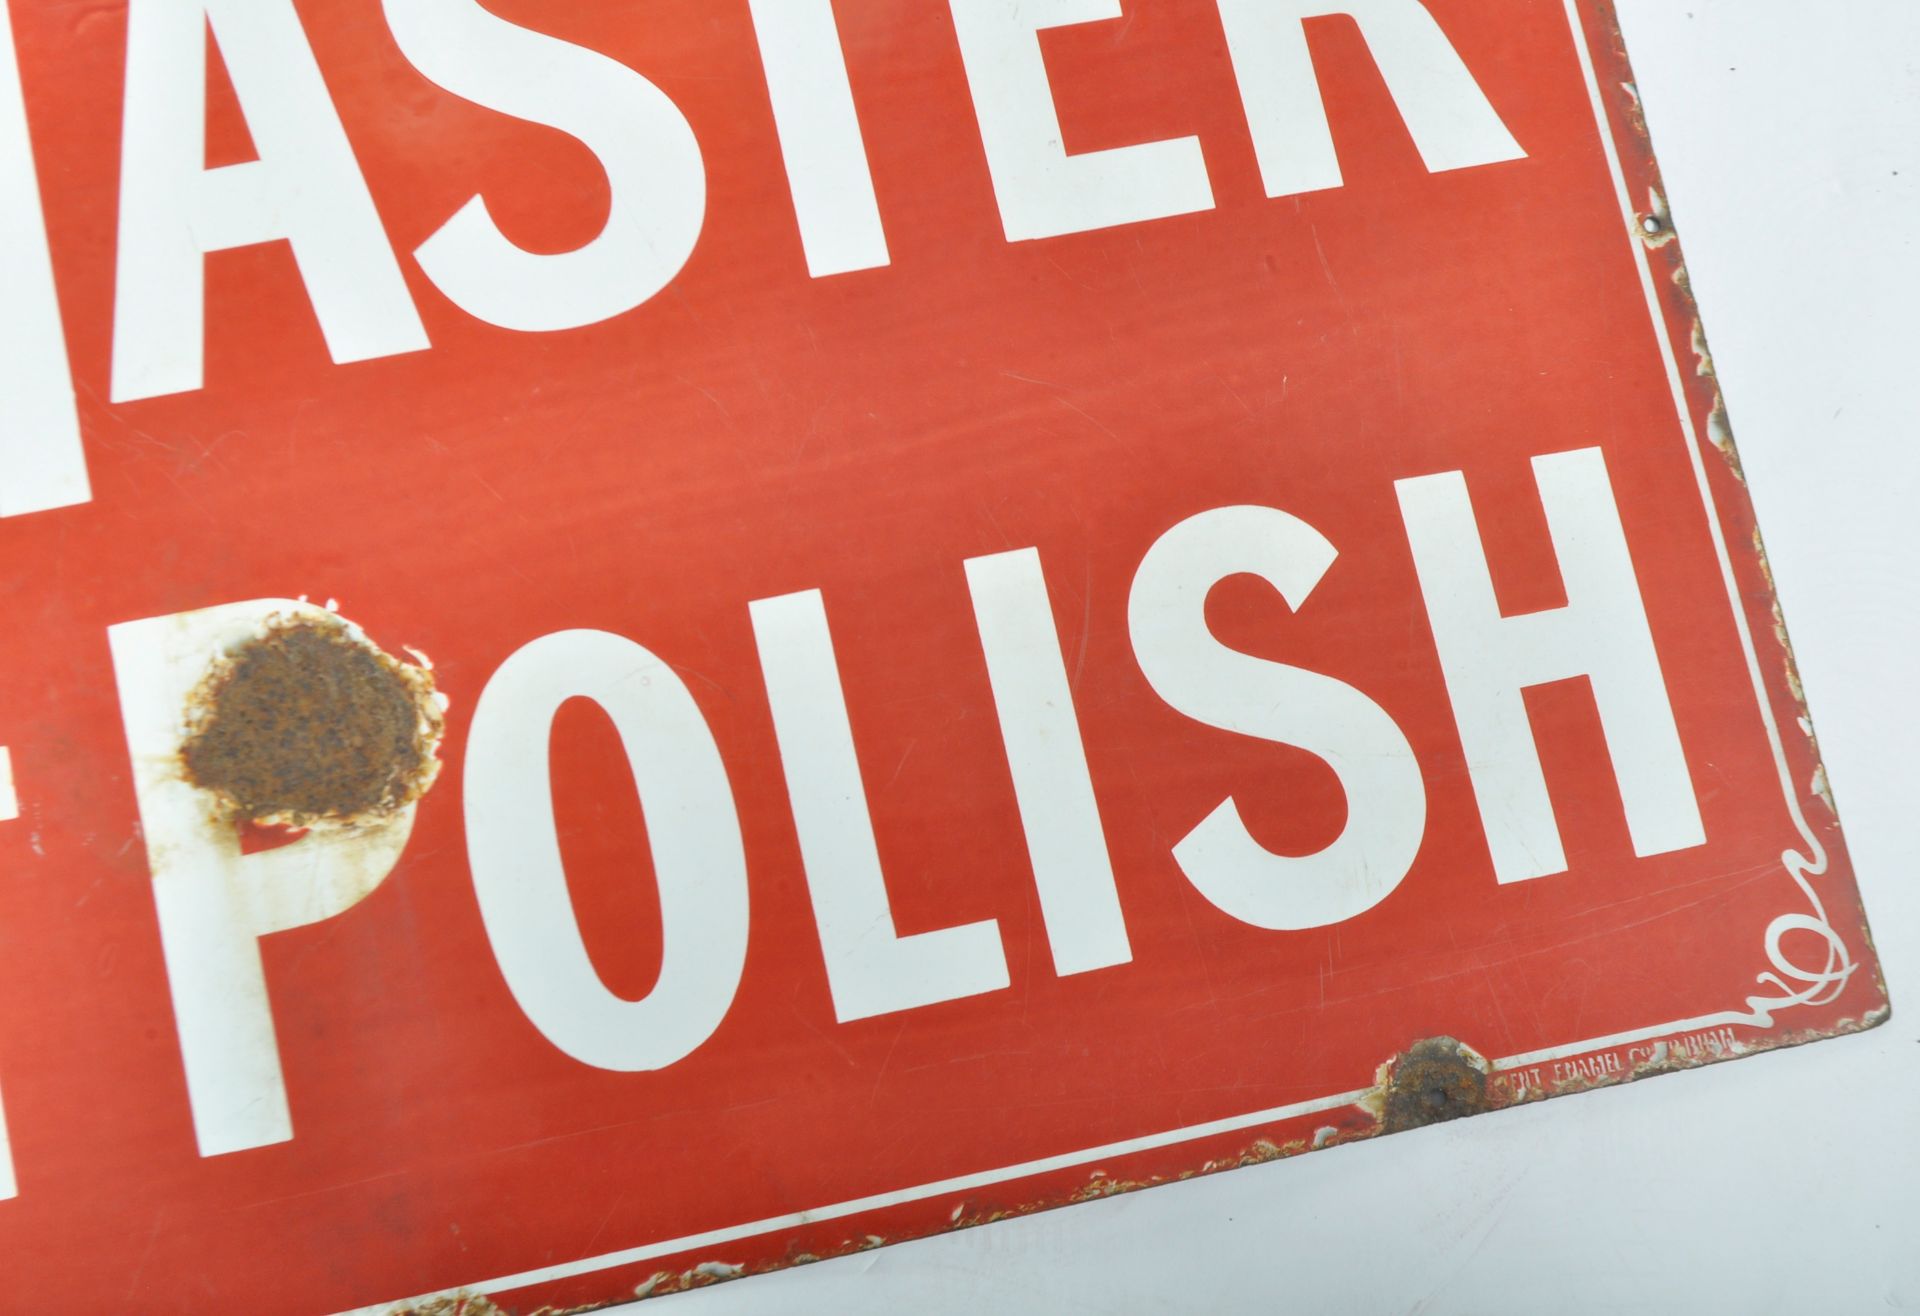 THE MASTERS BOOT POLISH - EARLY 20TH CENTURY ENAMEL SIGN - Image 5 of 6